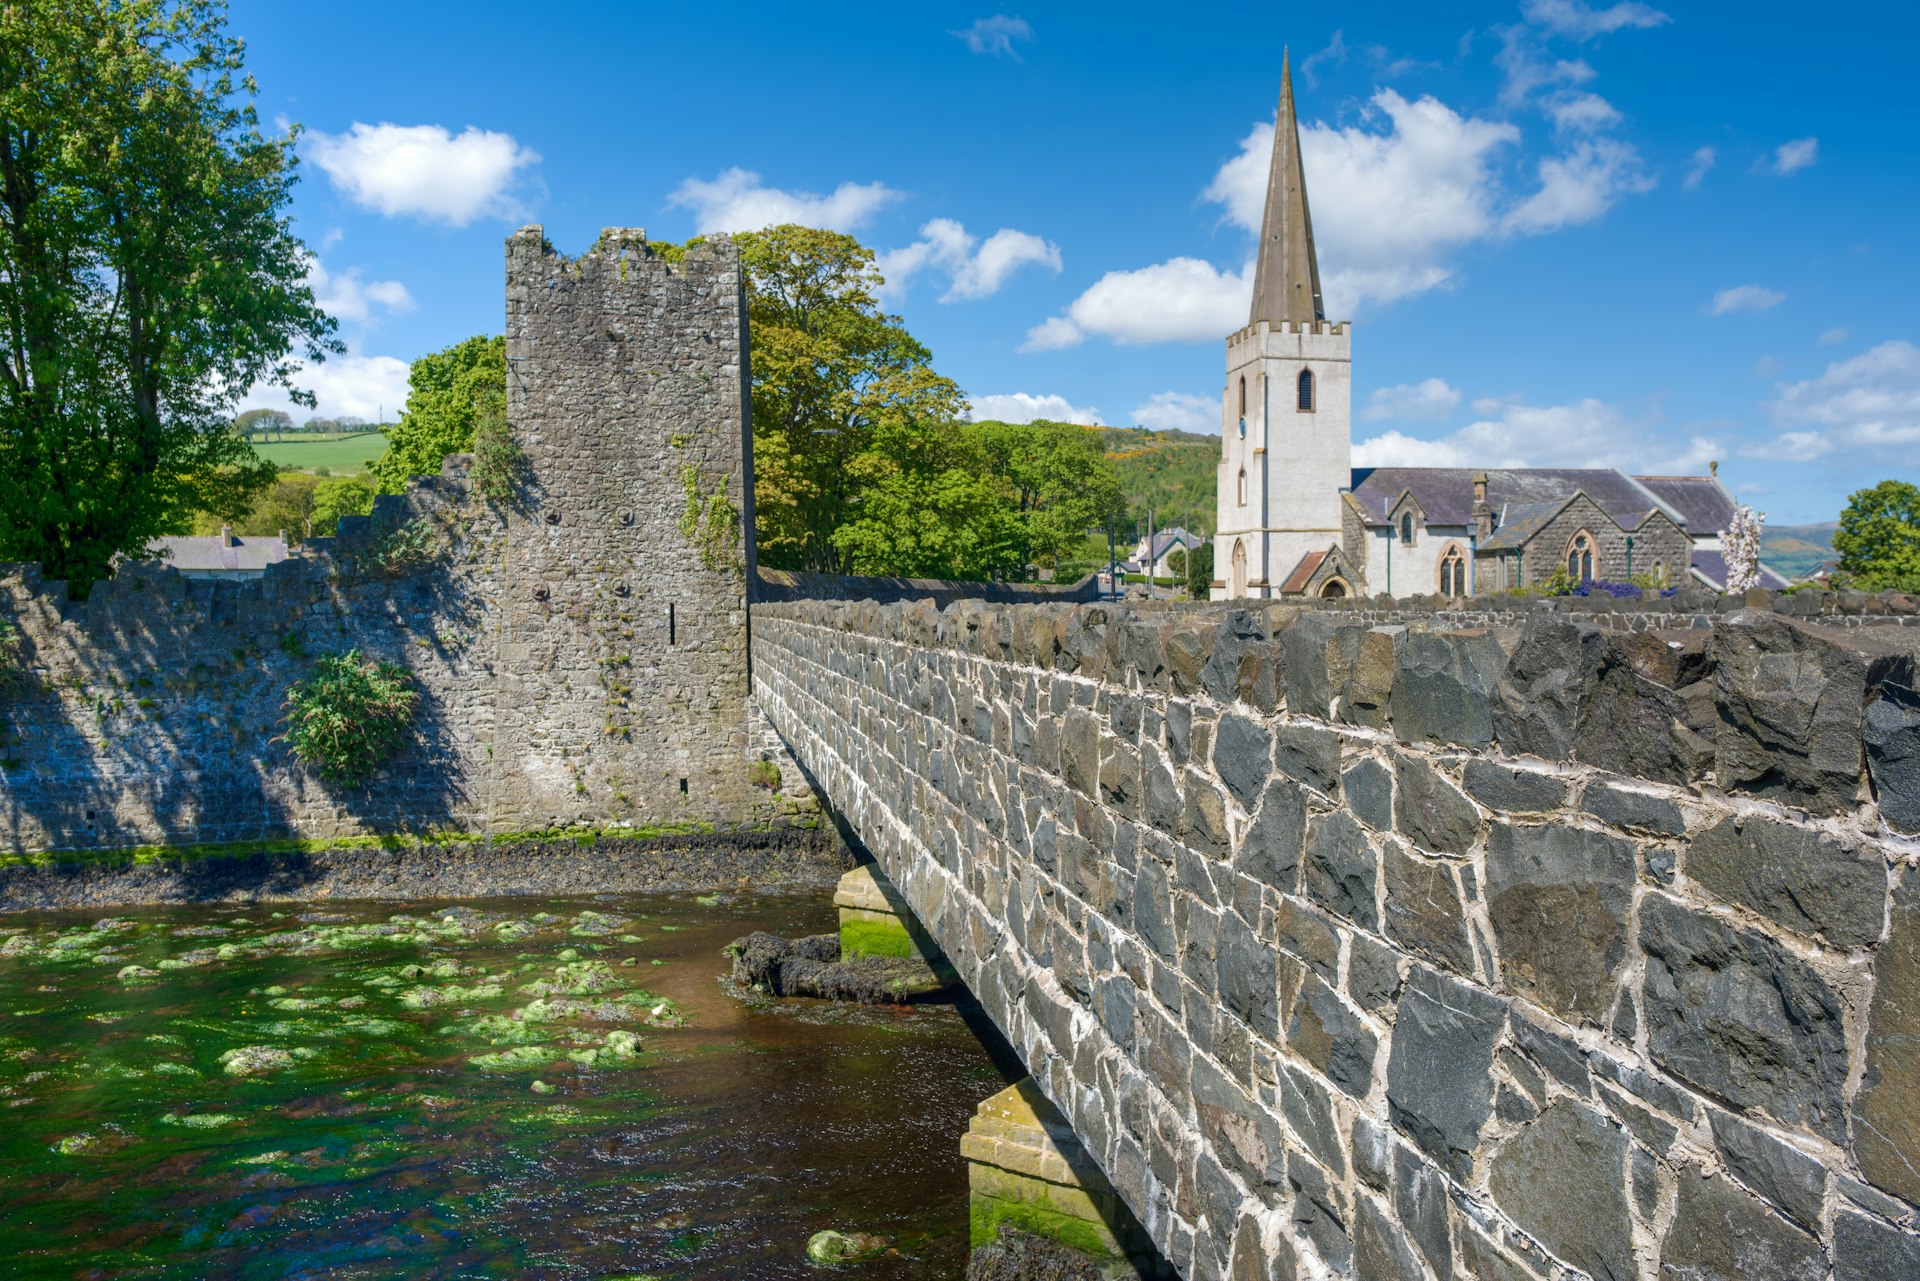 Glenarm Castle in a village dating back to Norman times set in a Conservation Area, Northern Ireland 